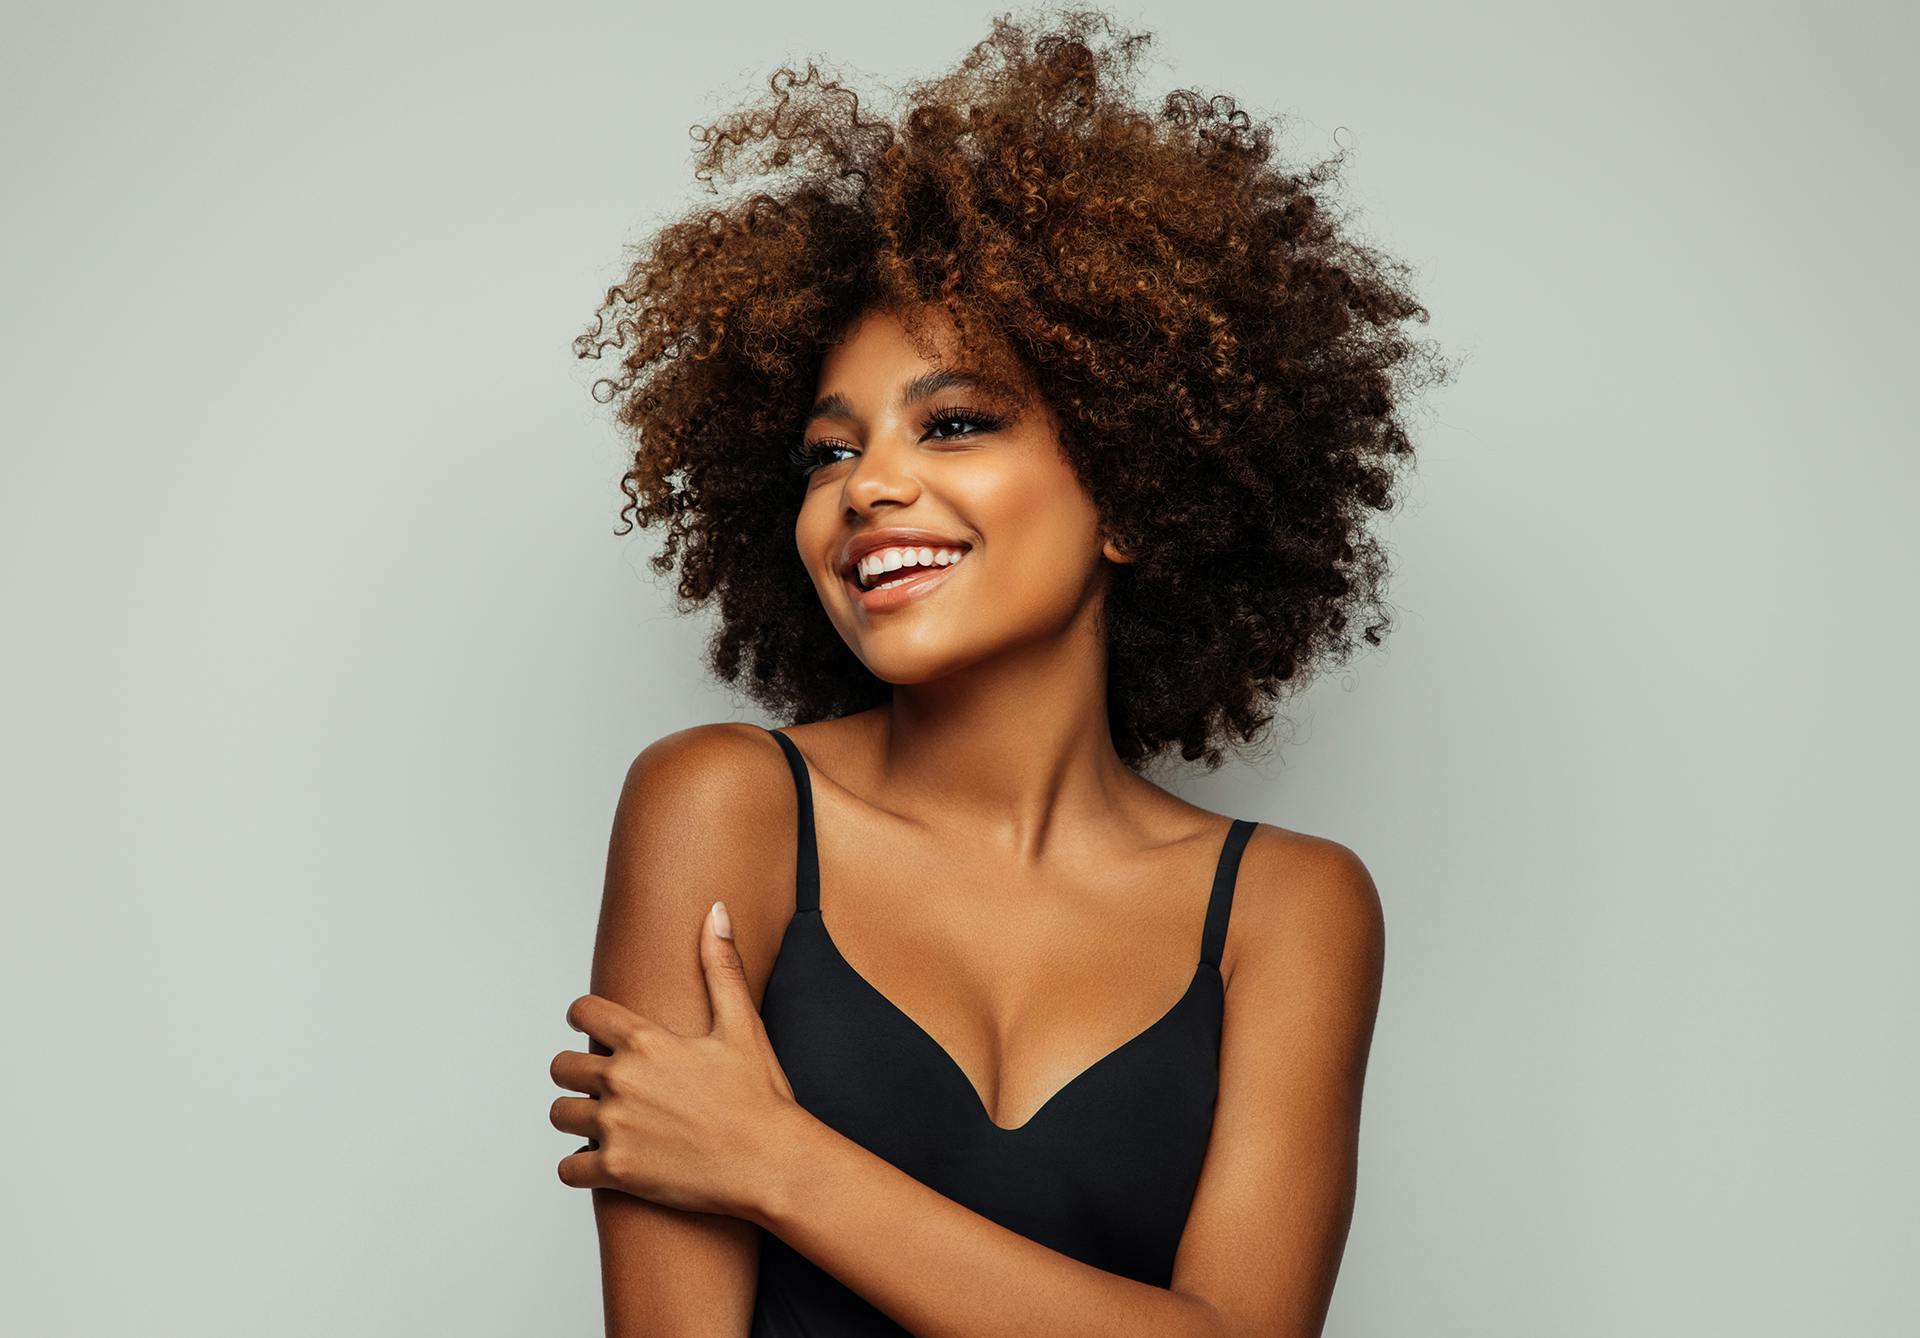 Frizzy haired woman in a black top smiling & looking to the side.